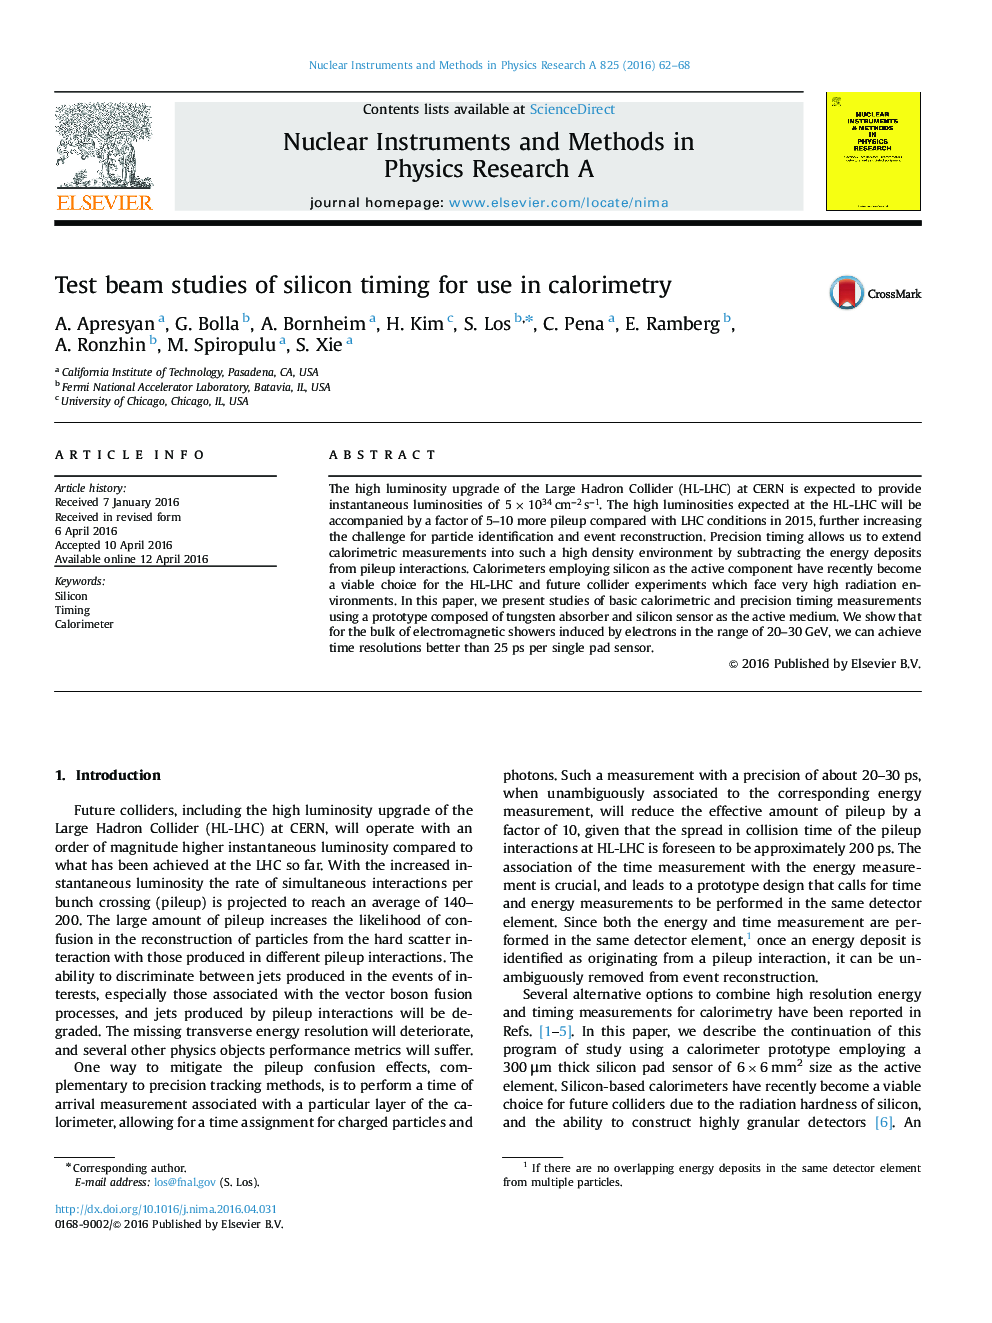 Test beam studies of silicon timing for use in calorimetry